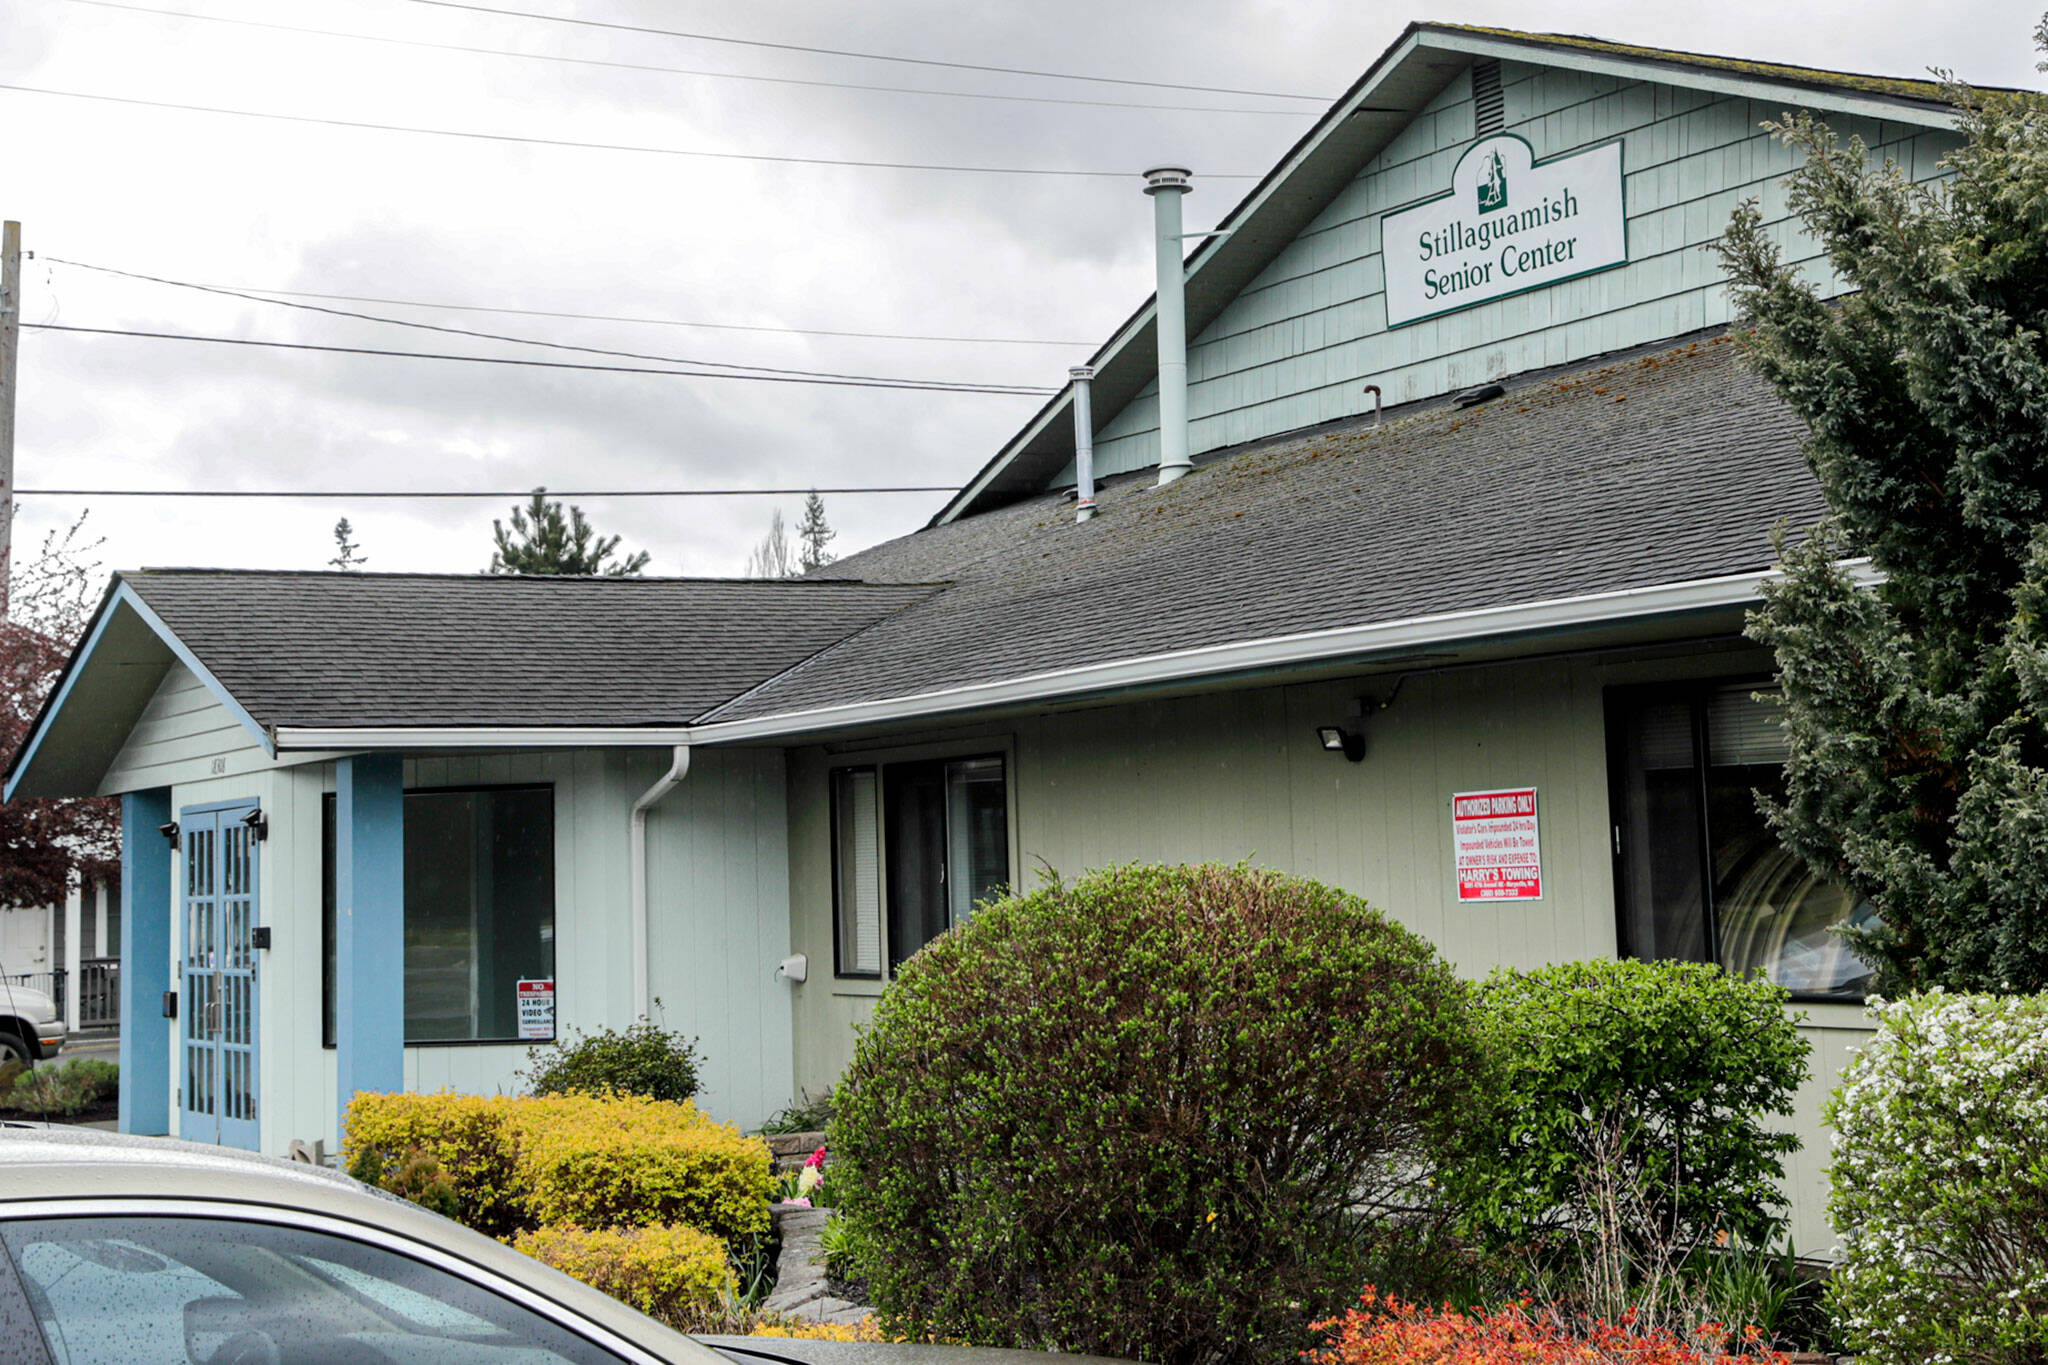 The Stilly Valley Center is selling its low-income housing for seniors. (Kevin Clark / The Herald)